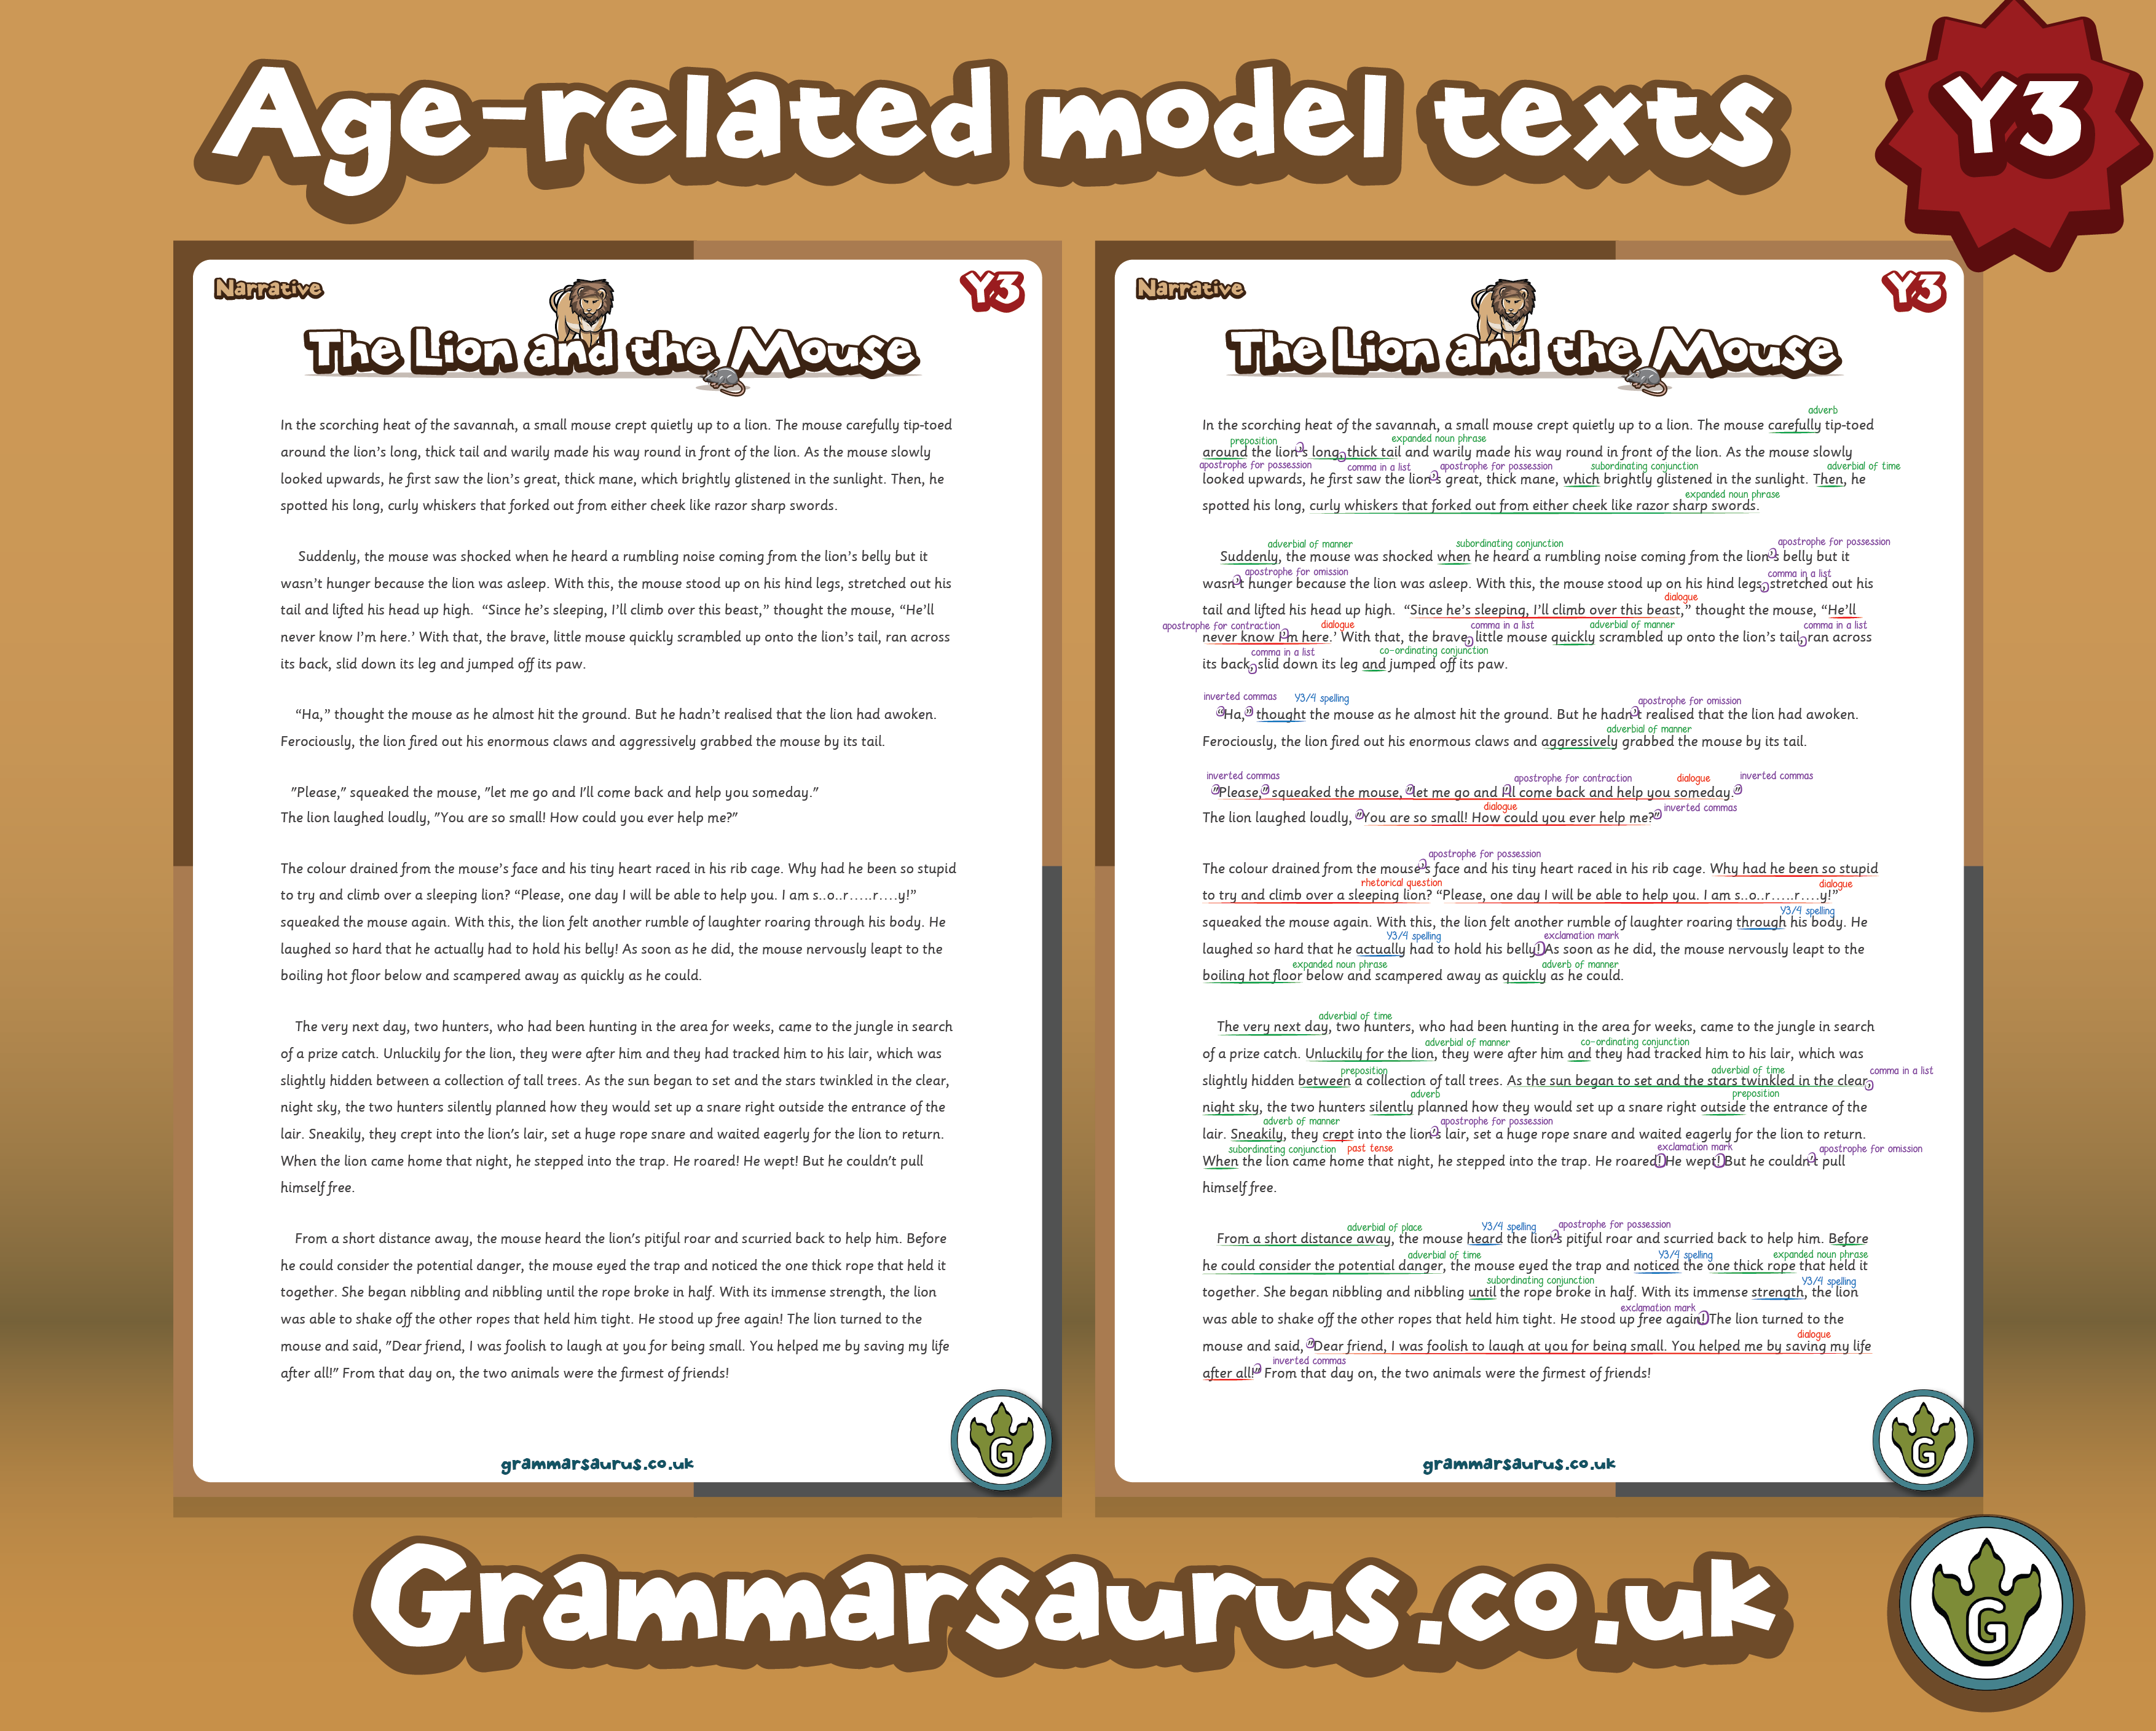 Year 3 Model Text – Instructions – How to rebel against the Roman occupiers  (🏴󠁧󠁢󠁳󠁣󠁴󠁿 P3 ,🇦🇺🇺🇸 Grade 2 & 🇮🇪 2nd Class) - Grammarsaurus